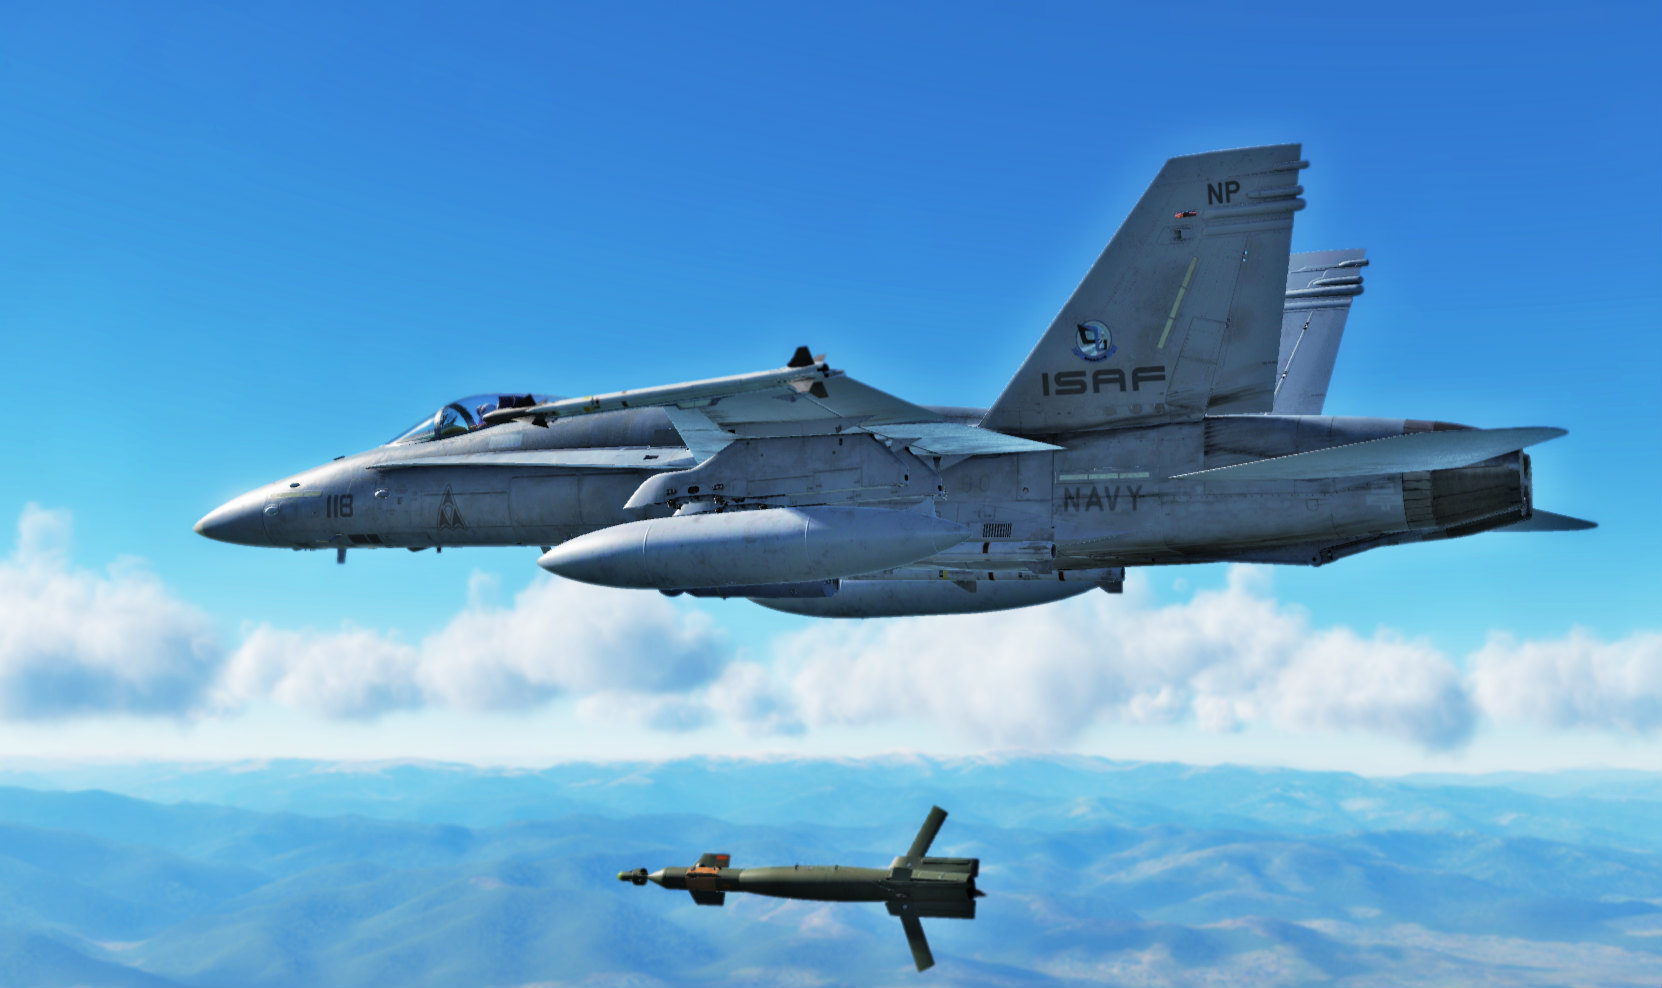 Ace Combat- ISAF 118th Tactical Fighter Wing “Mobius” F-18 skin